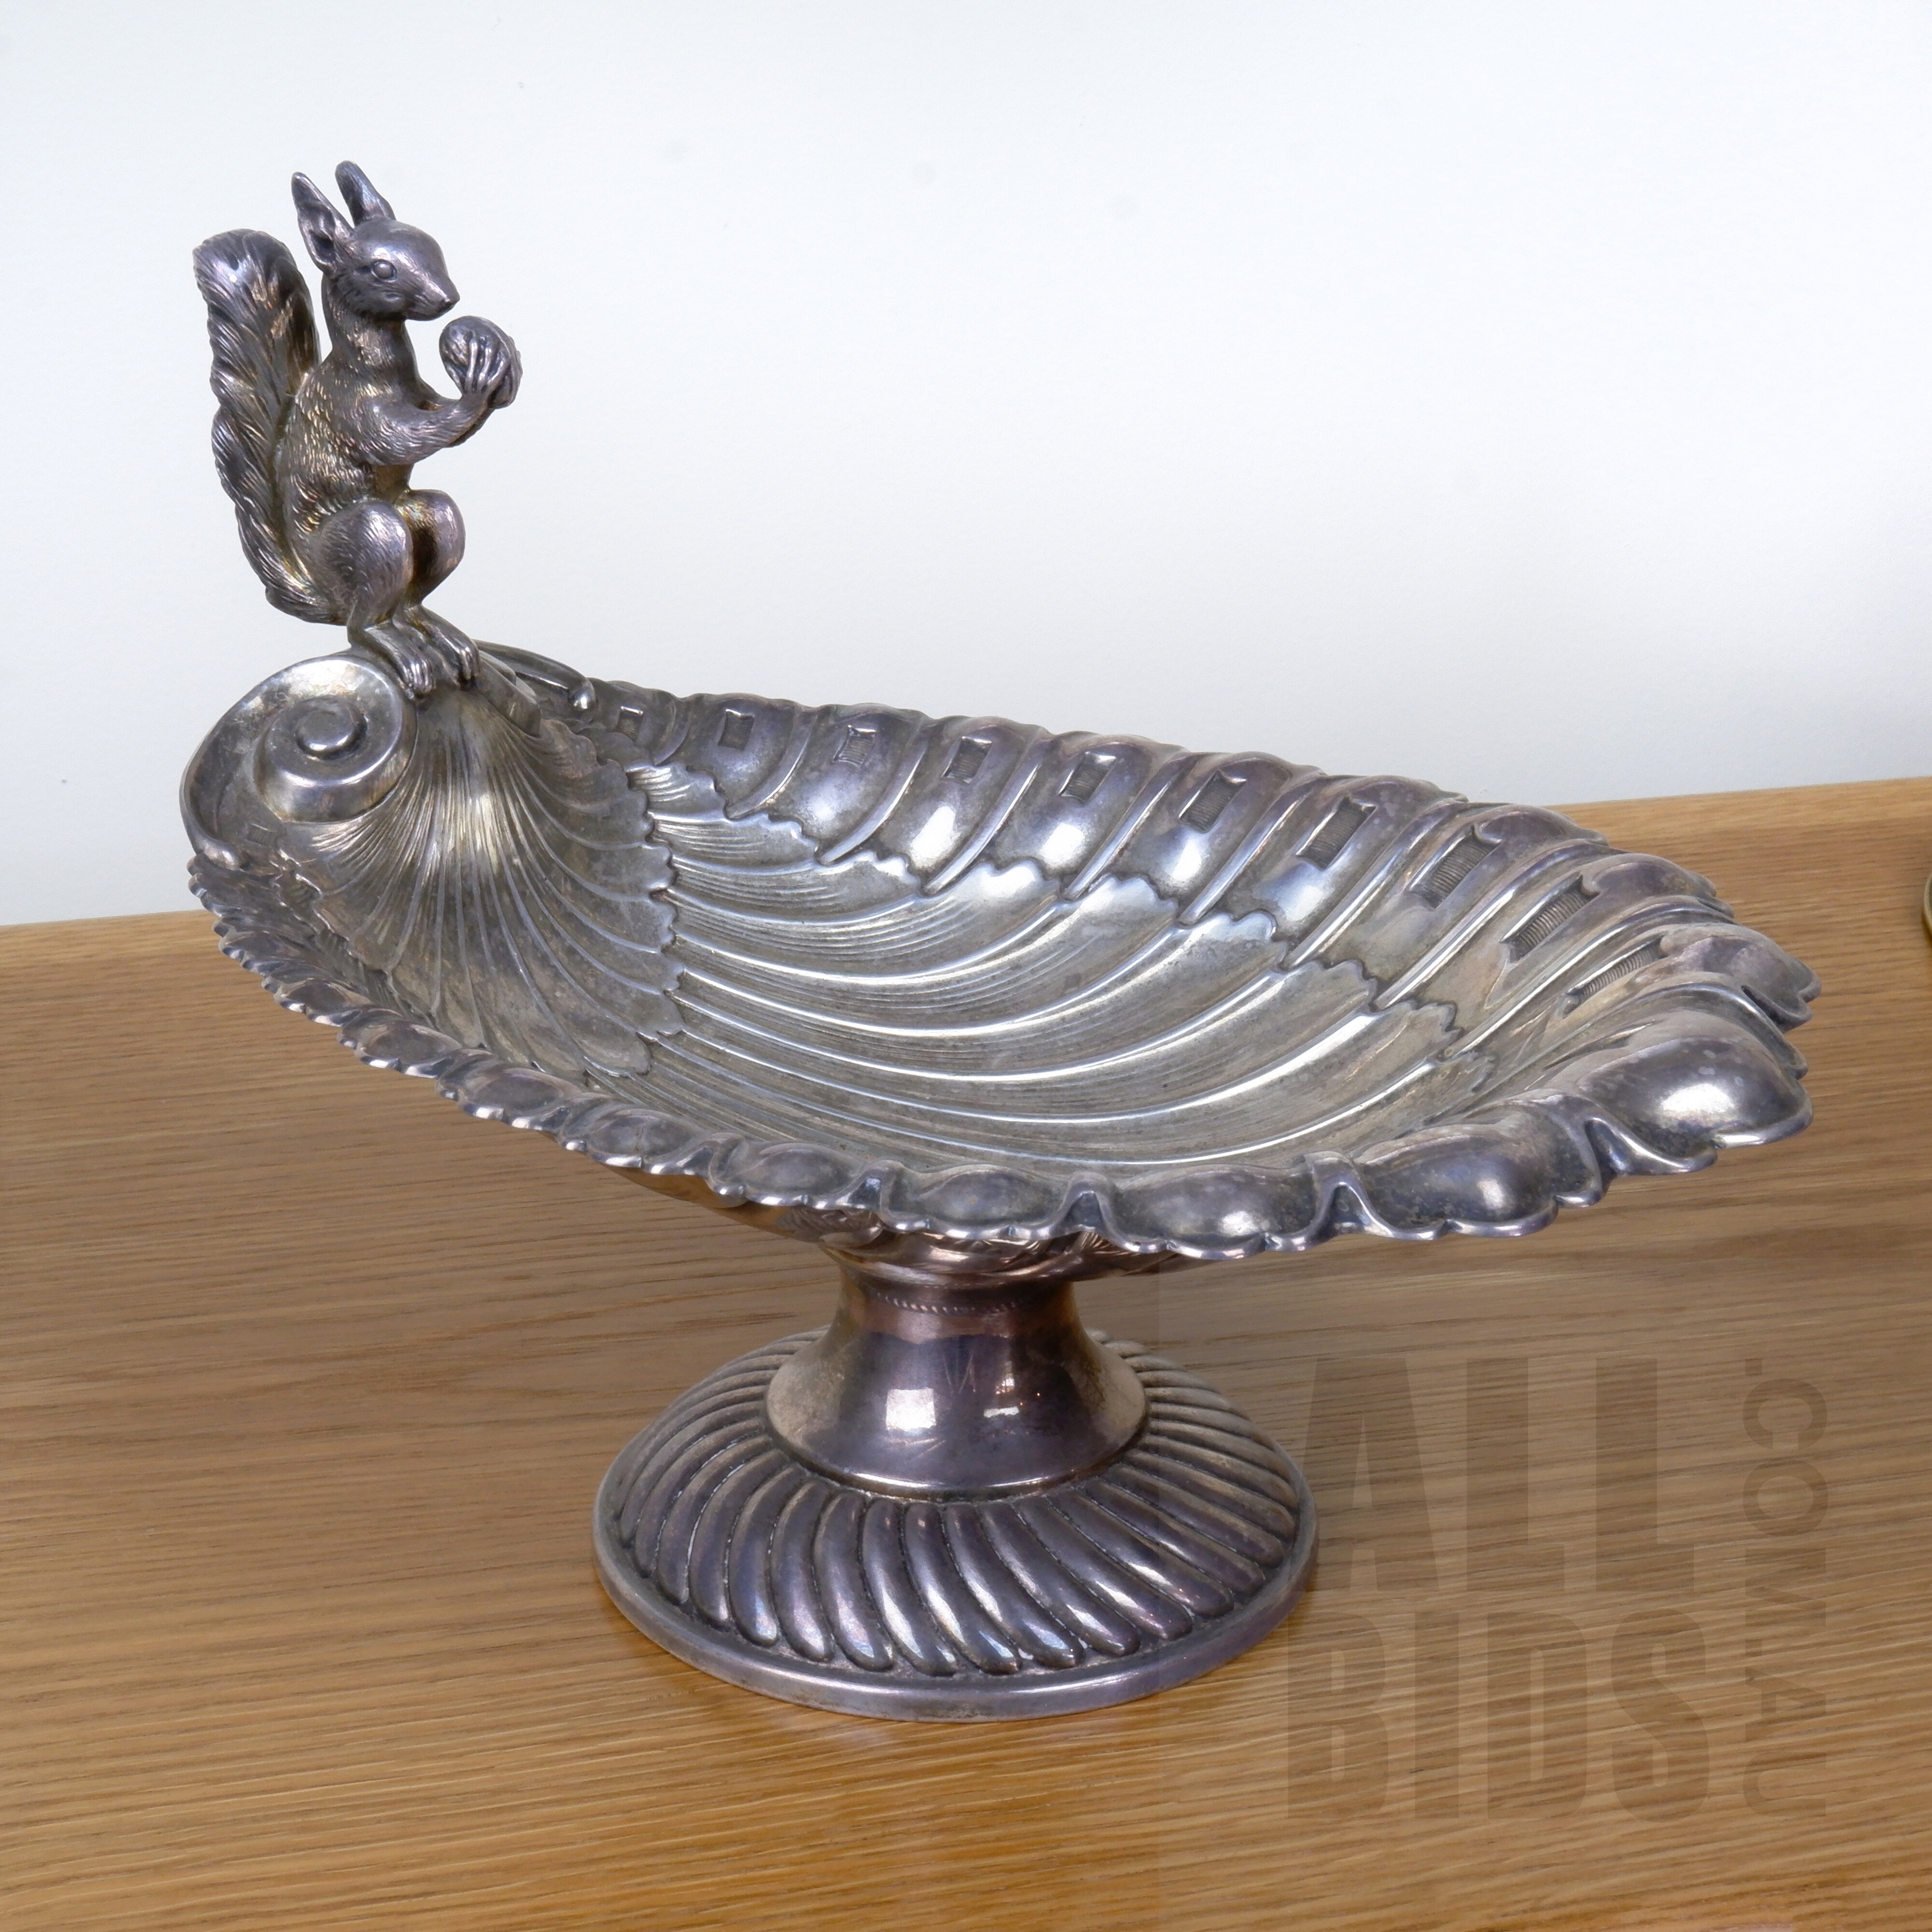 'Antique Silver Plated Shell Form Tazza with Squirrel Finial'